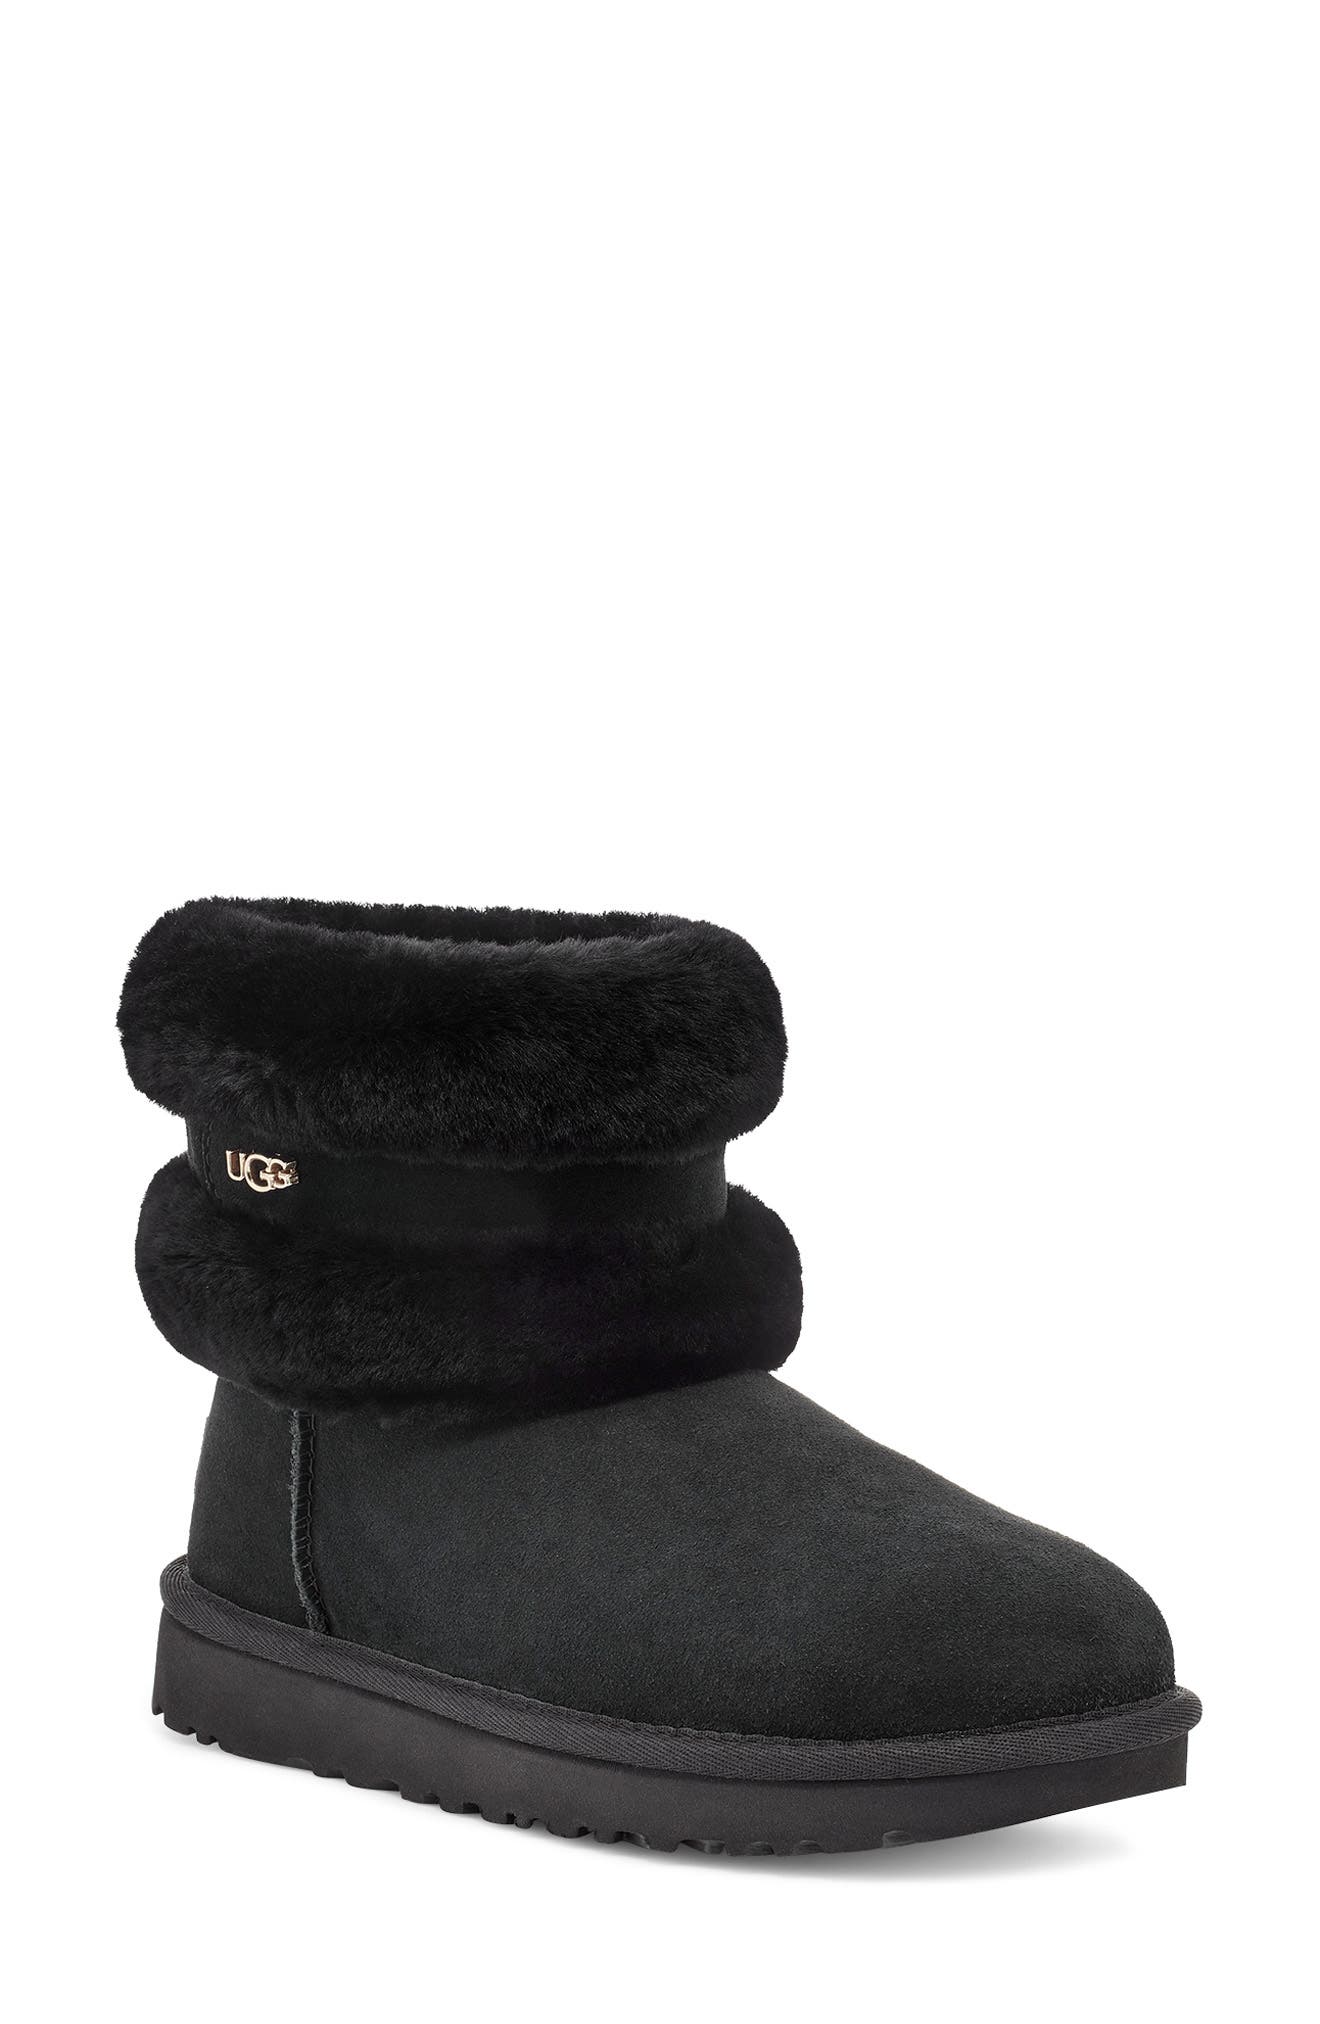 uggs fluffy boots